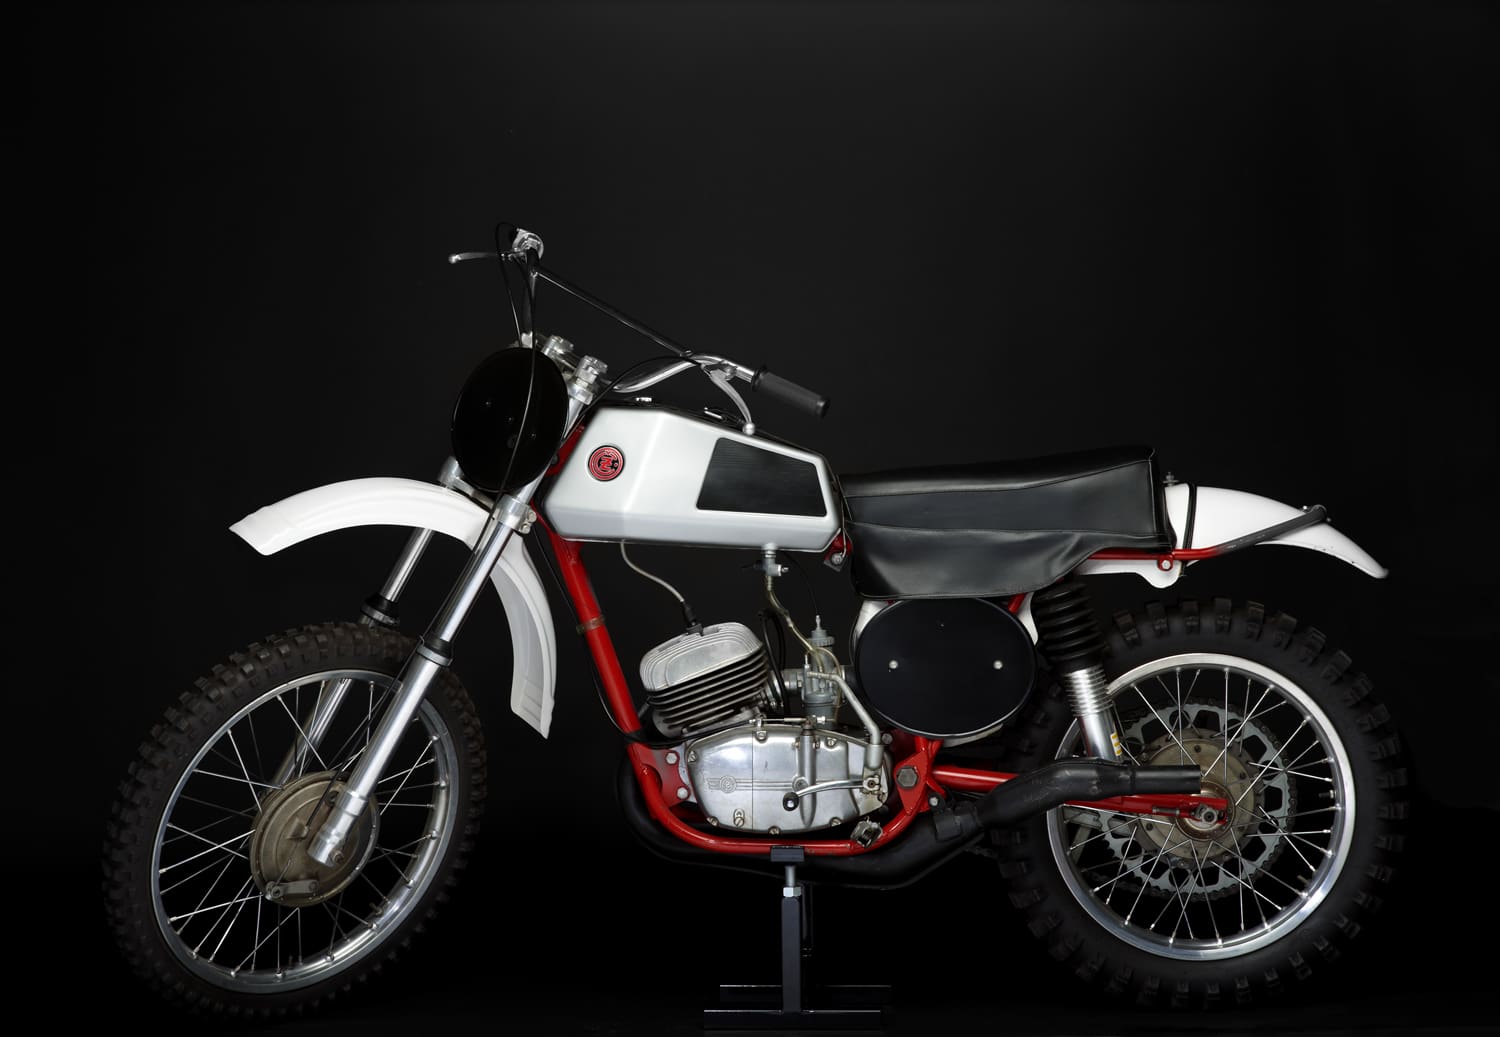 A white and red dirt bike on display against a black background.